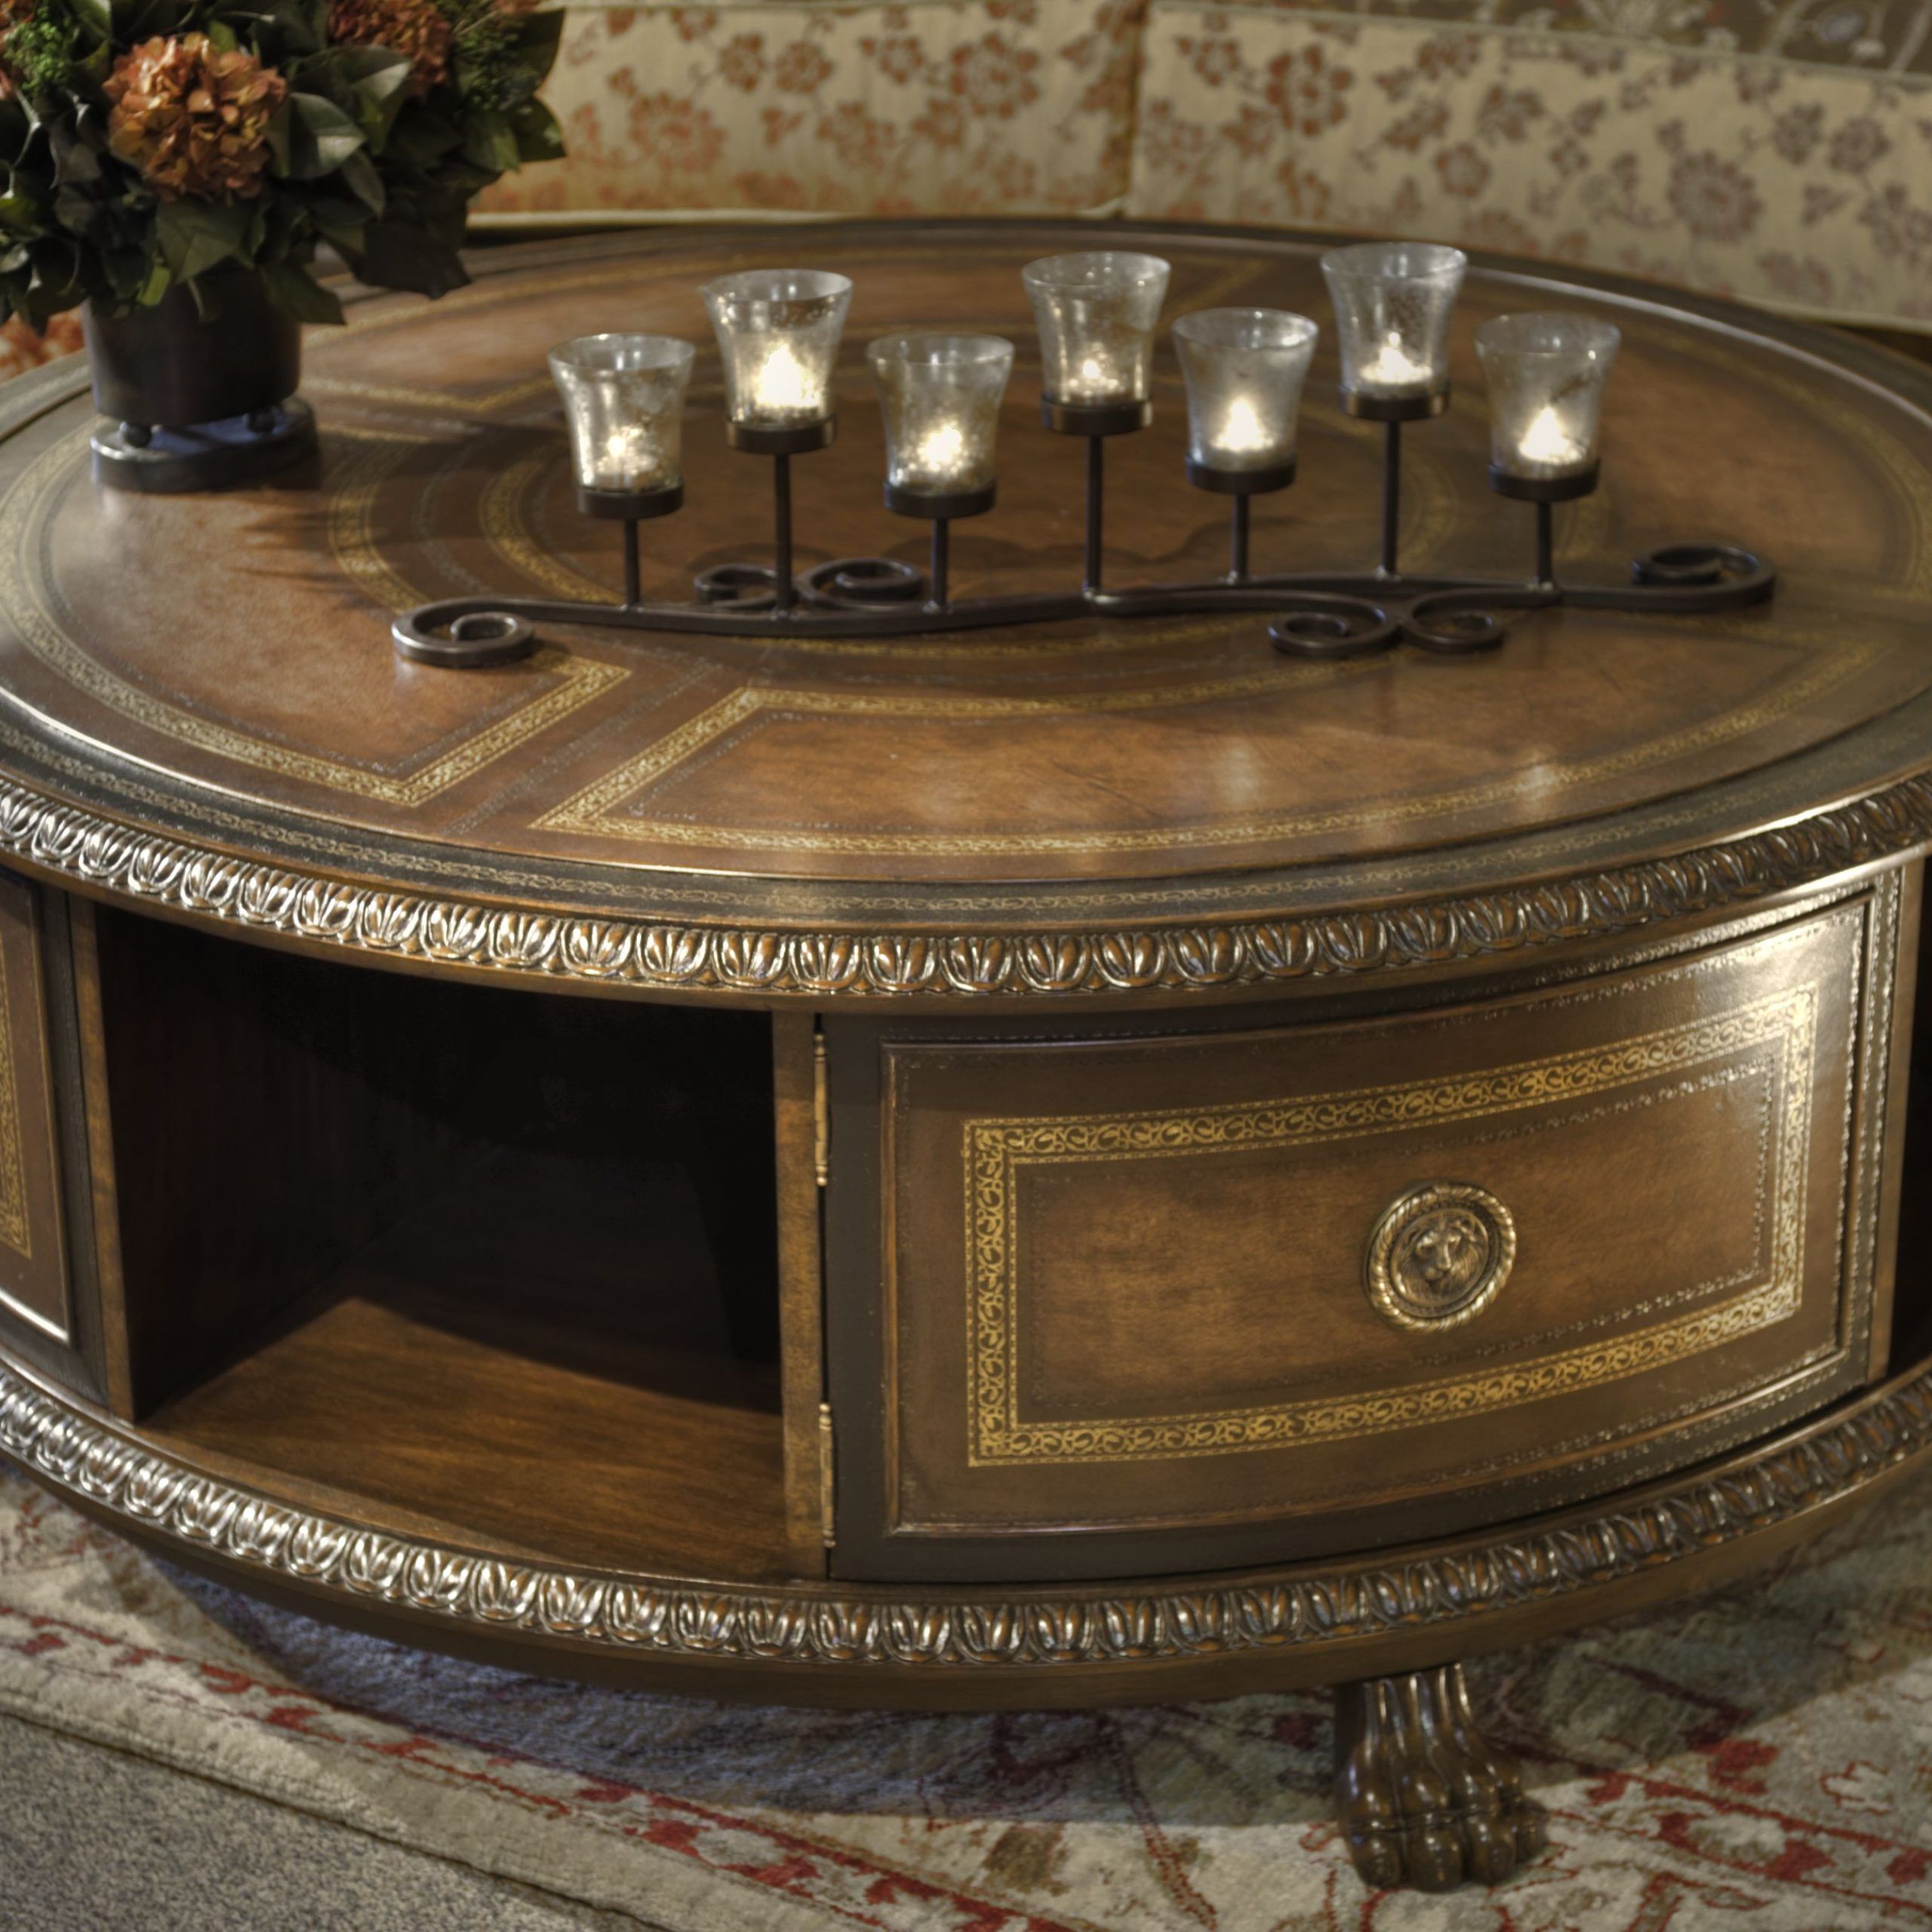 Unique Round Coffee Tables For Every Style And Home – Coffee Table Decor Inside American Heritage Round Coffee Tables (View 18 of 20)